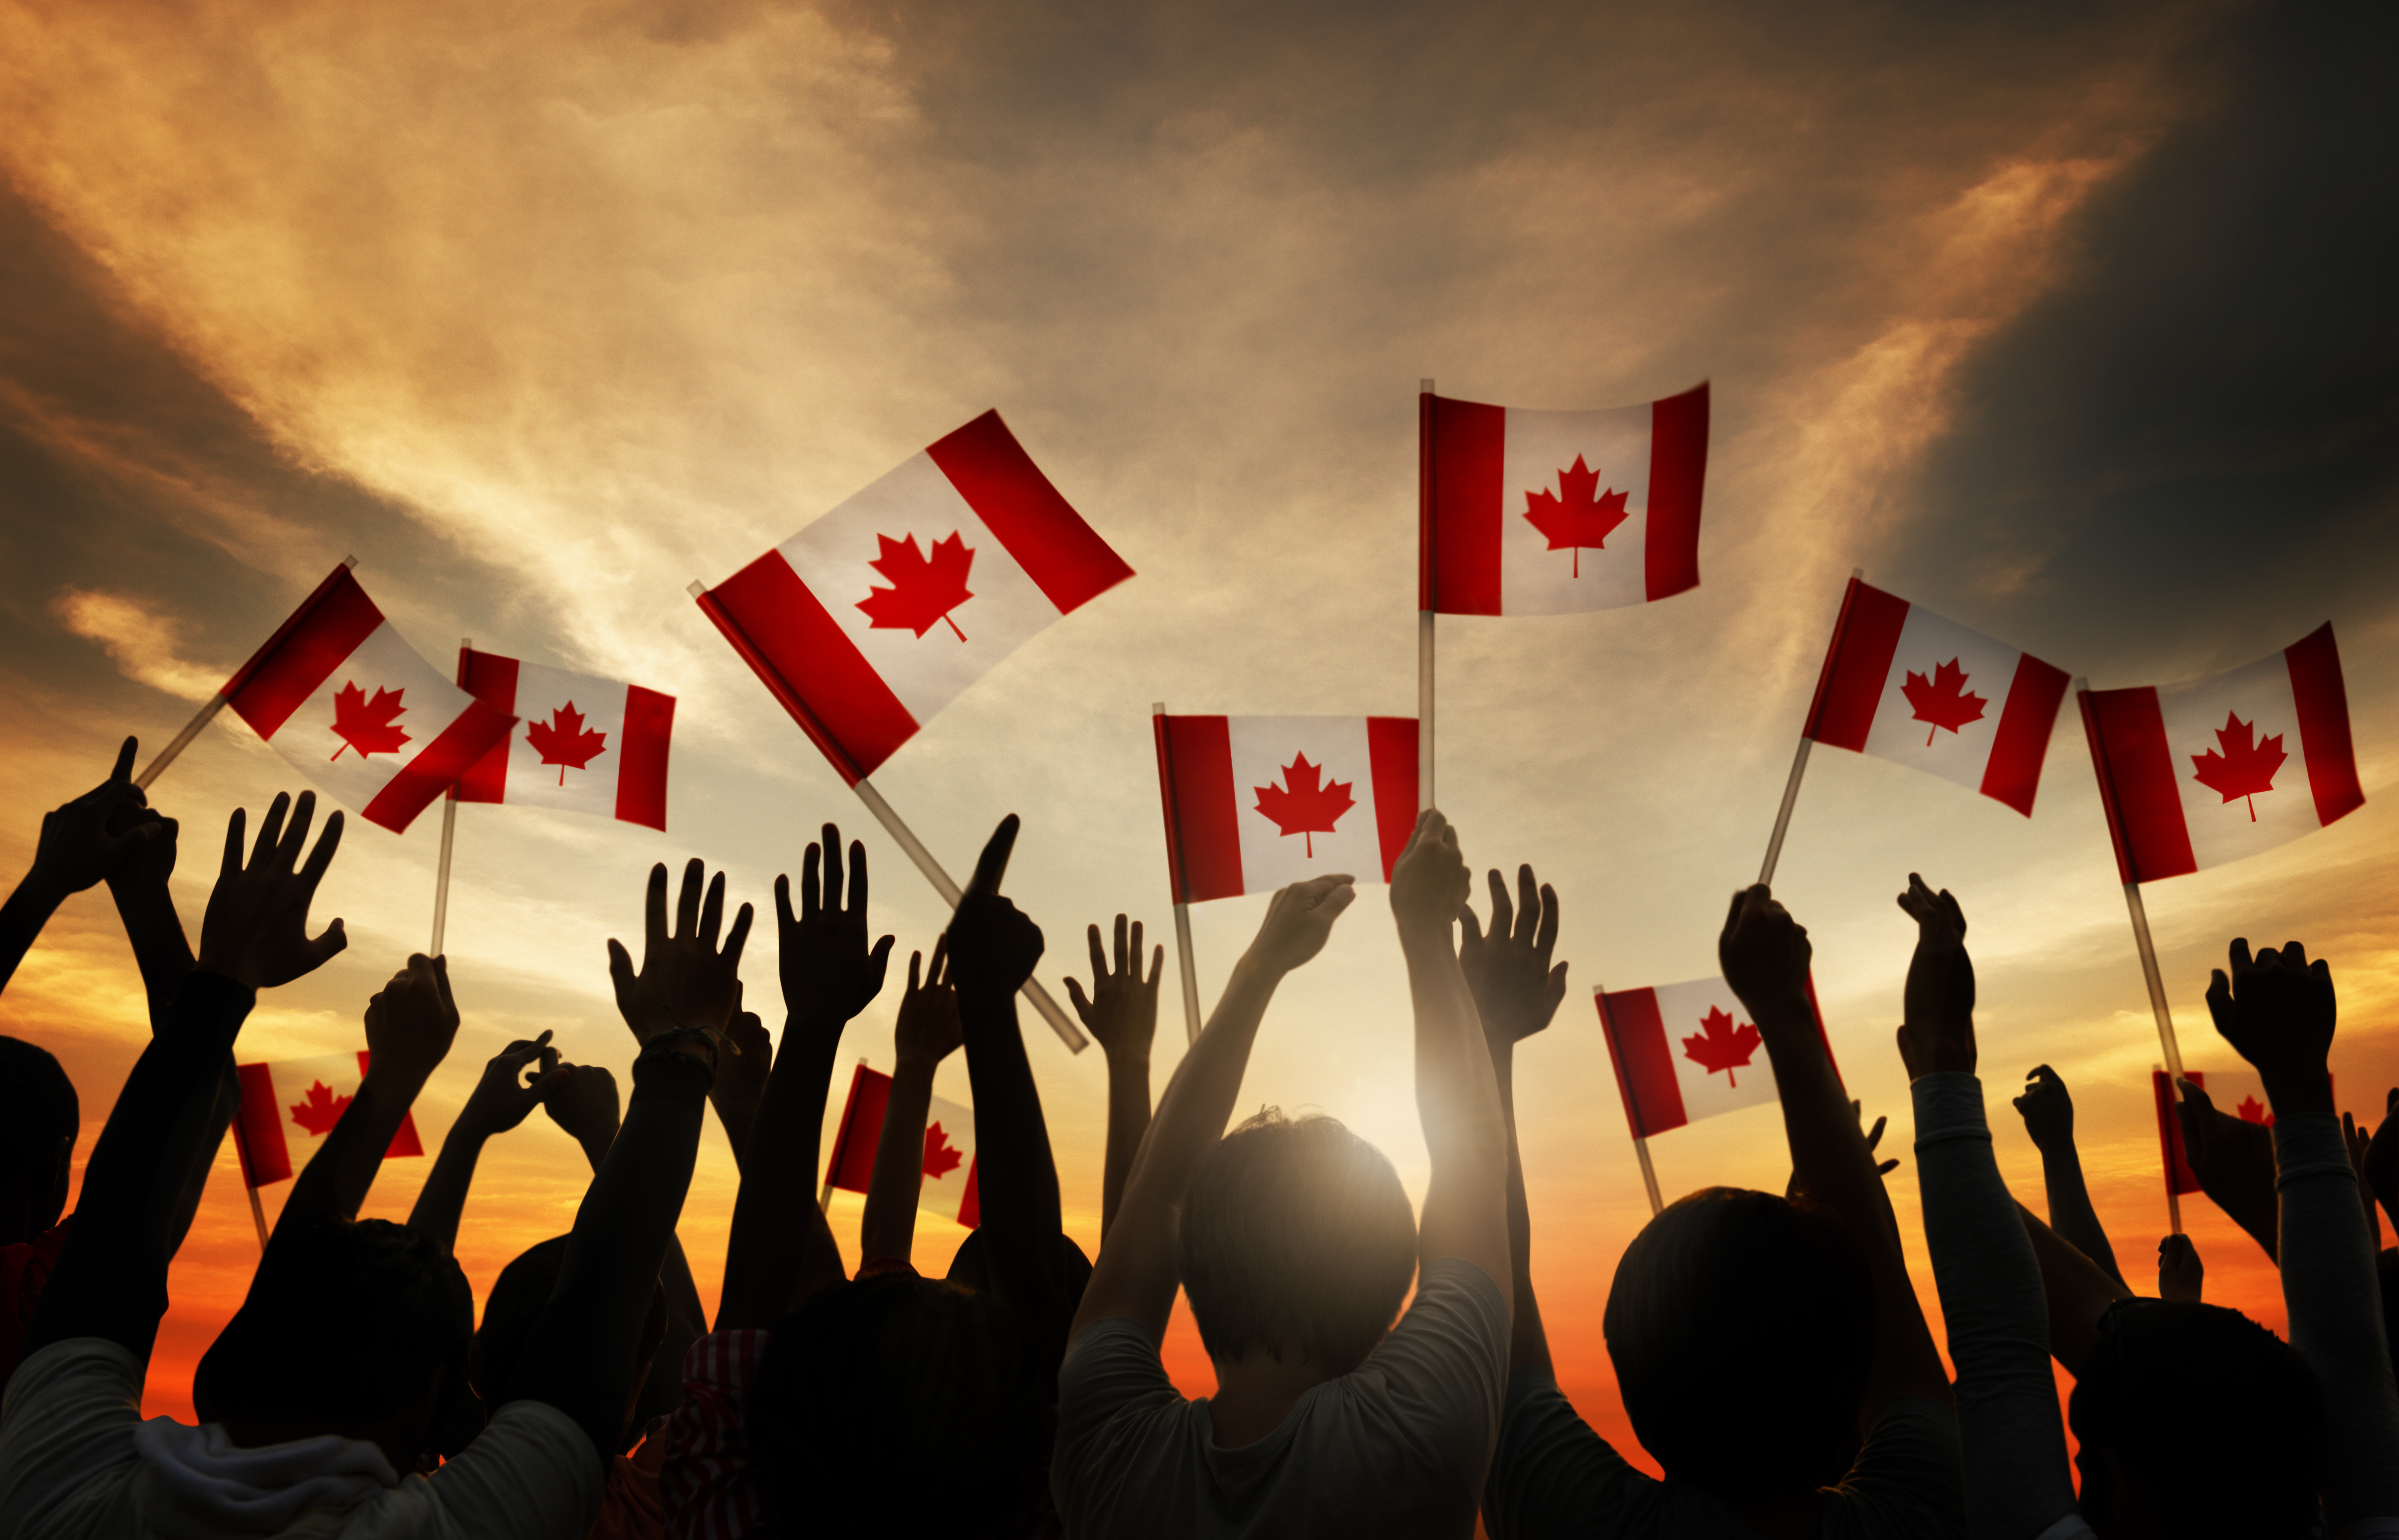 Group of People Waving Canada Flags